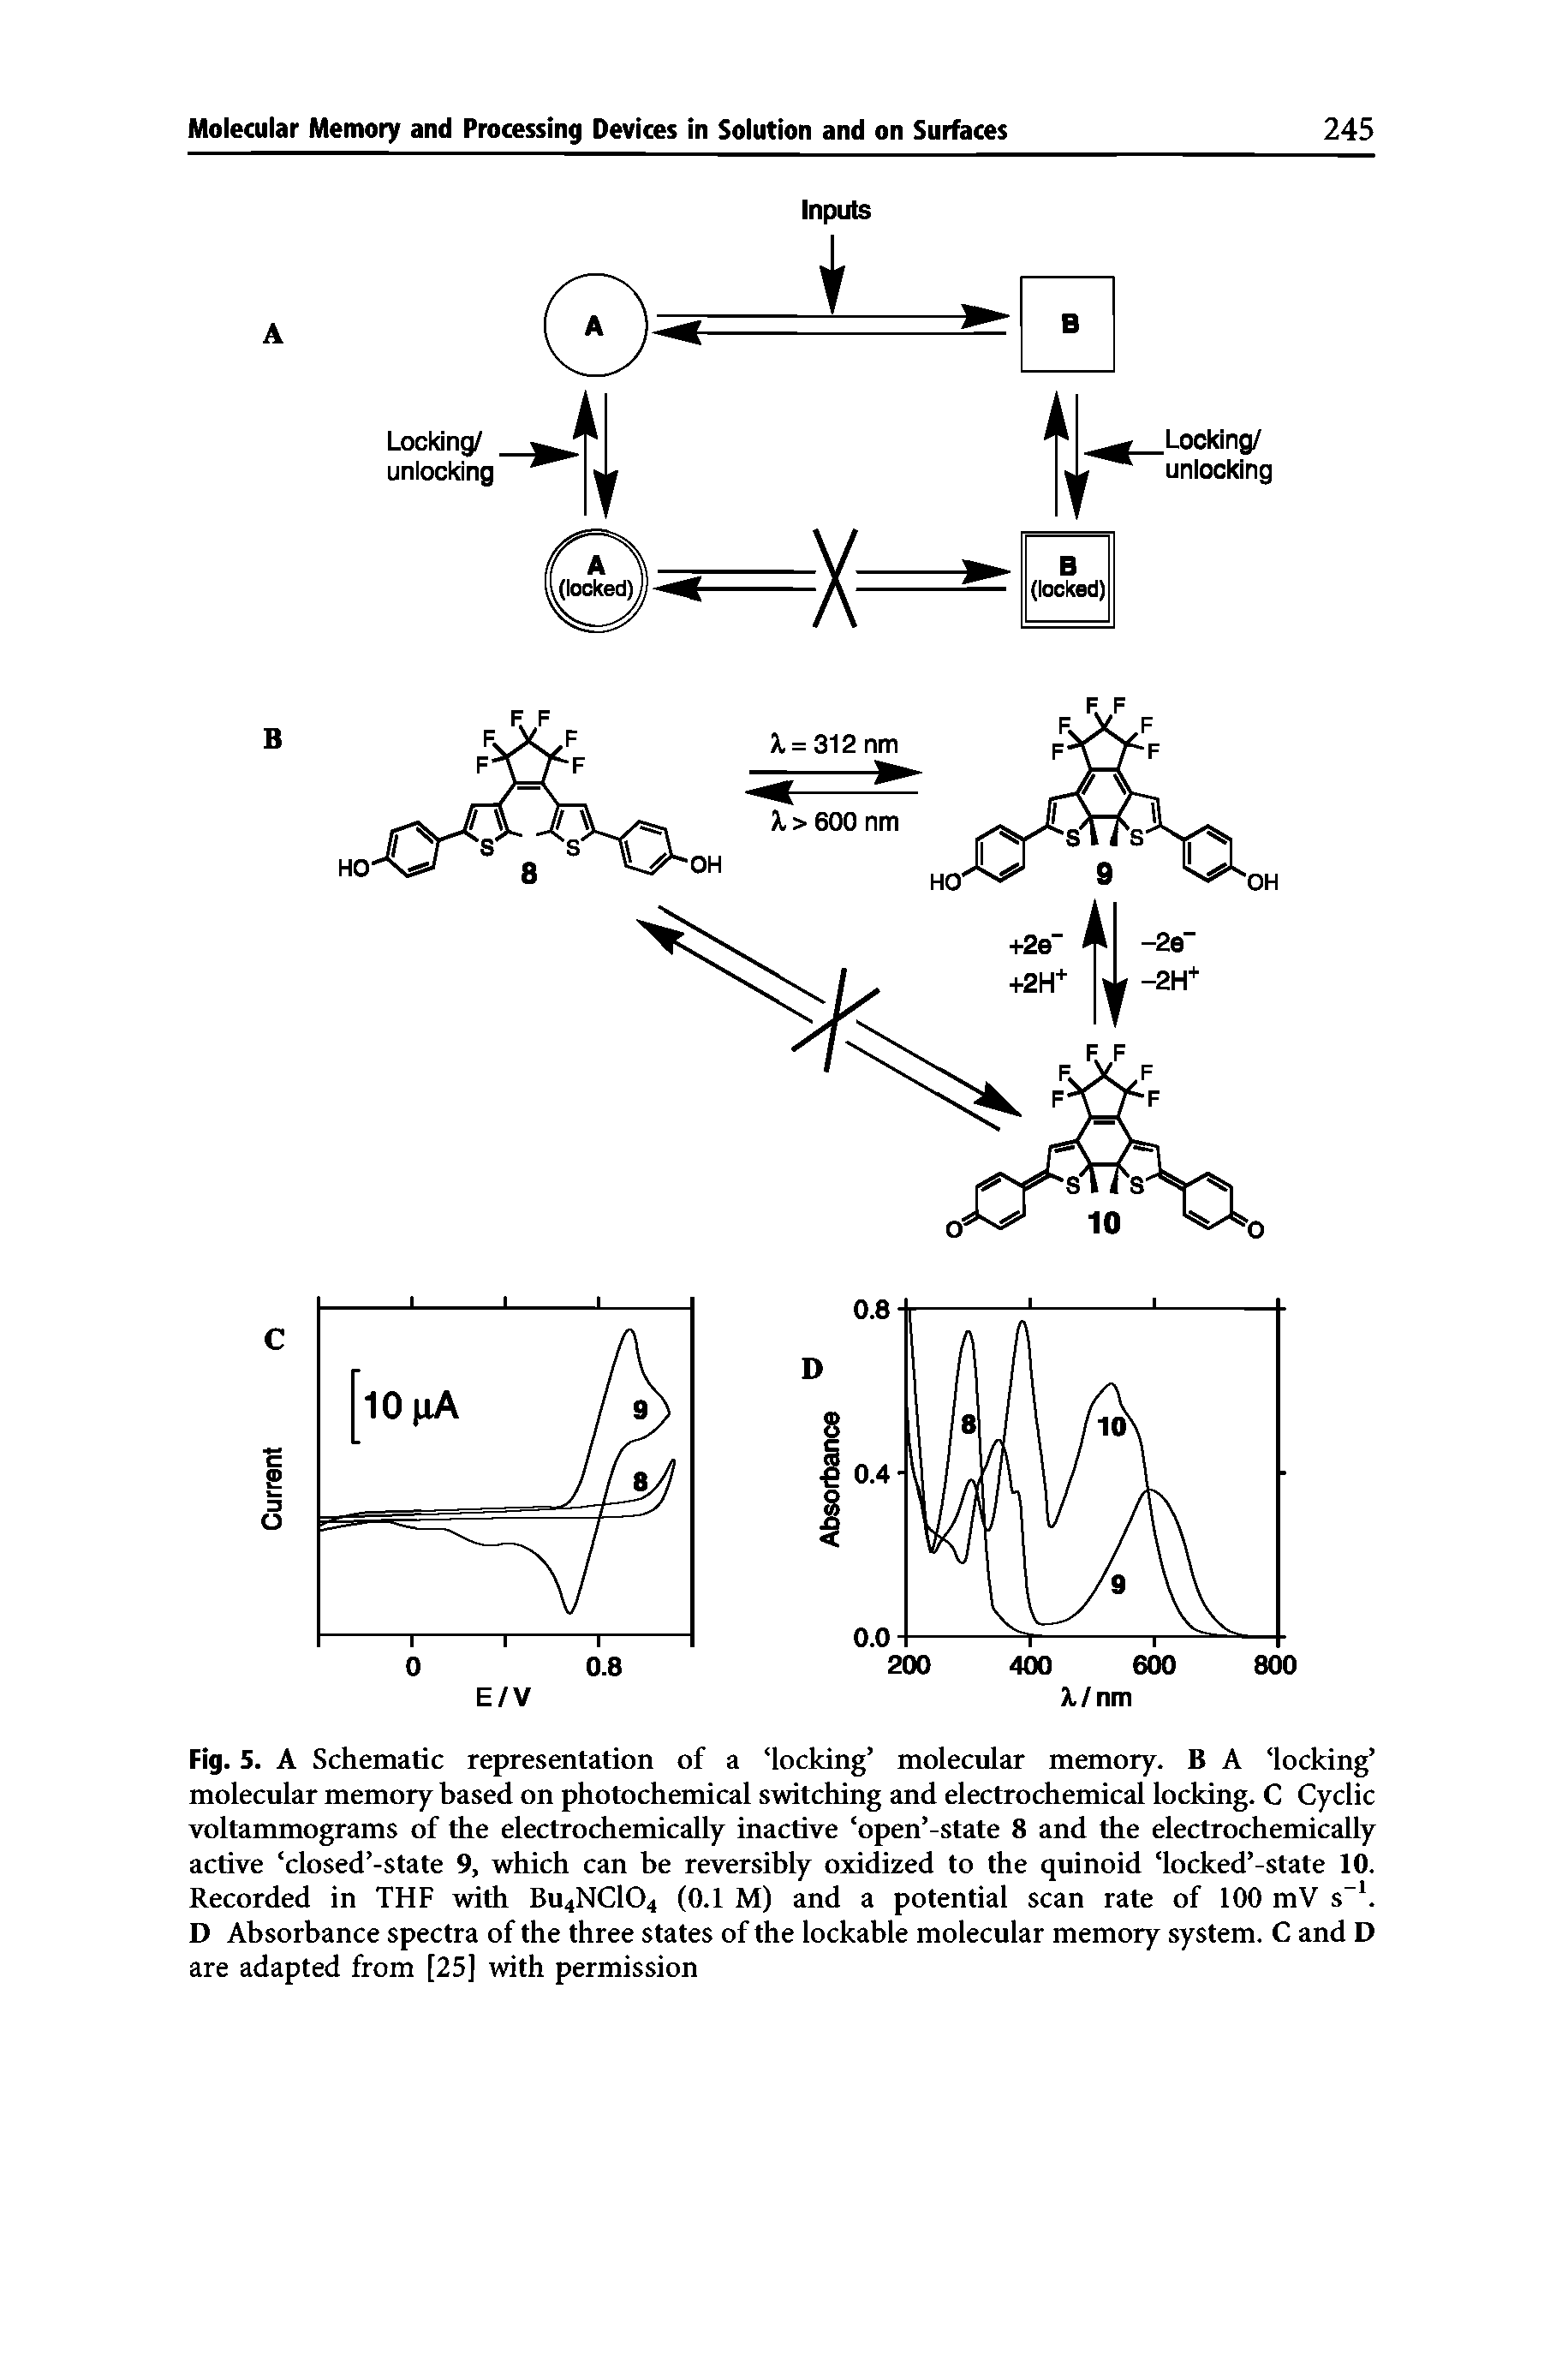 Fig. 5. A Schematic representation of a locking molecular memory. B A locking molecular memory based on photochemical switching and electrochemical locking. C Cyclic voltammograms of the electrochemically inactive open -state 8 and the electrochemically active closed -state 9, which can be reversibly oxidized to the quinoid locked -state 10. Recorded in THF with Bu4NC104 (0.1 M) and a potential scan rate of 100 mV s-1. D Absorbance spectra of the three states of the lockable molecular memory system. C and D are adapted from [25] with permission...